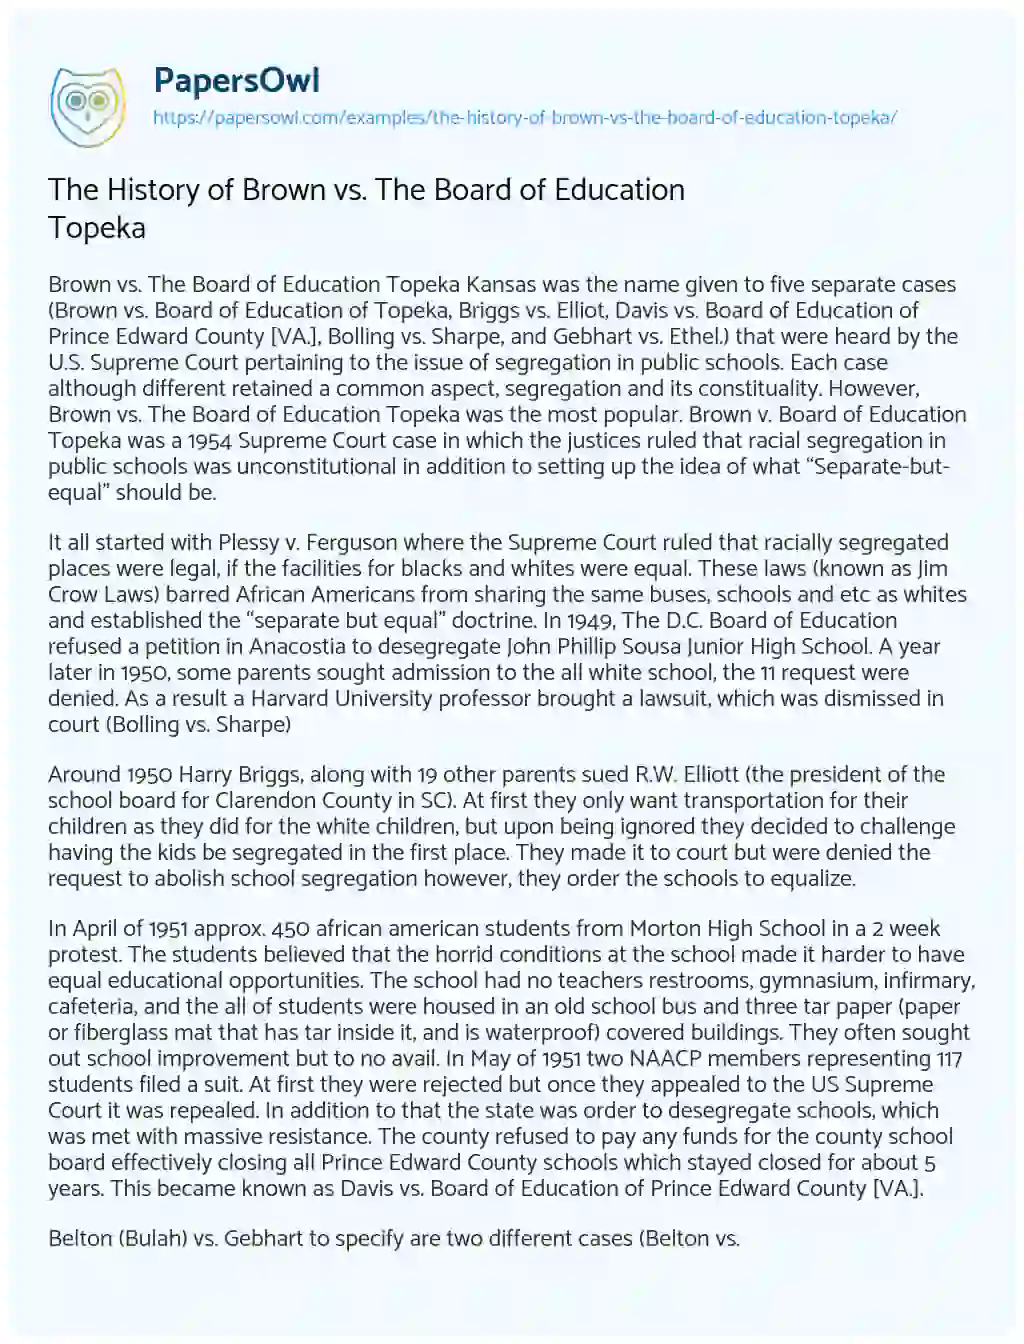 The History of Brown Vs. the Board of Education Topeka essay